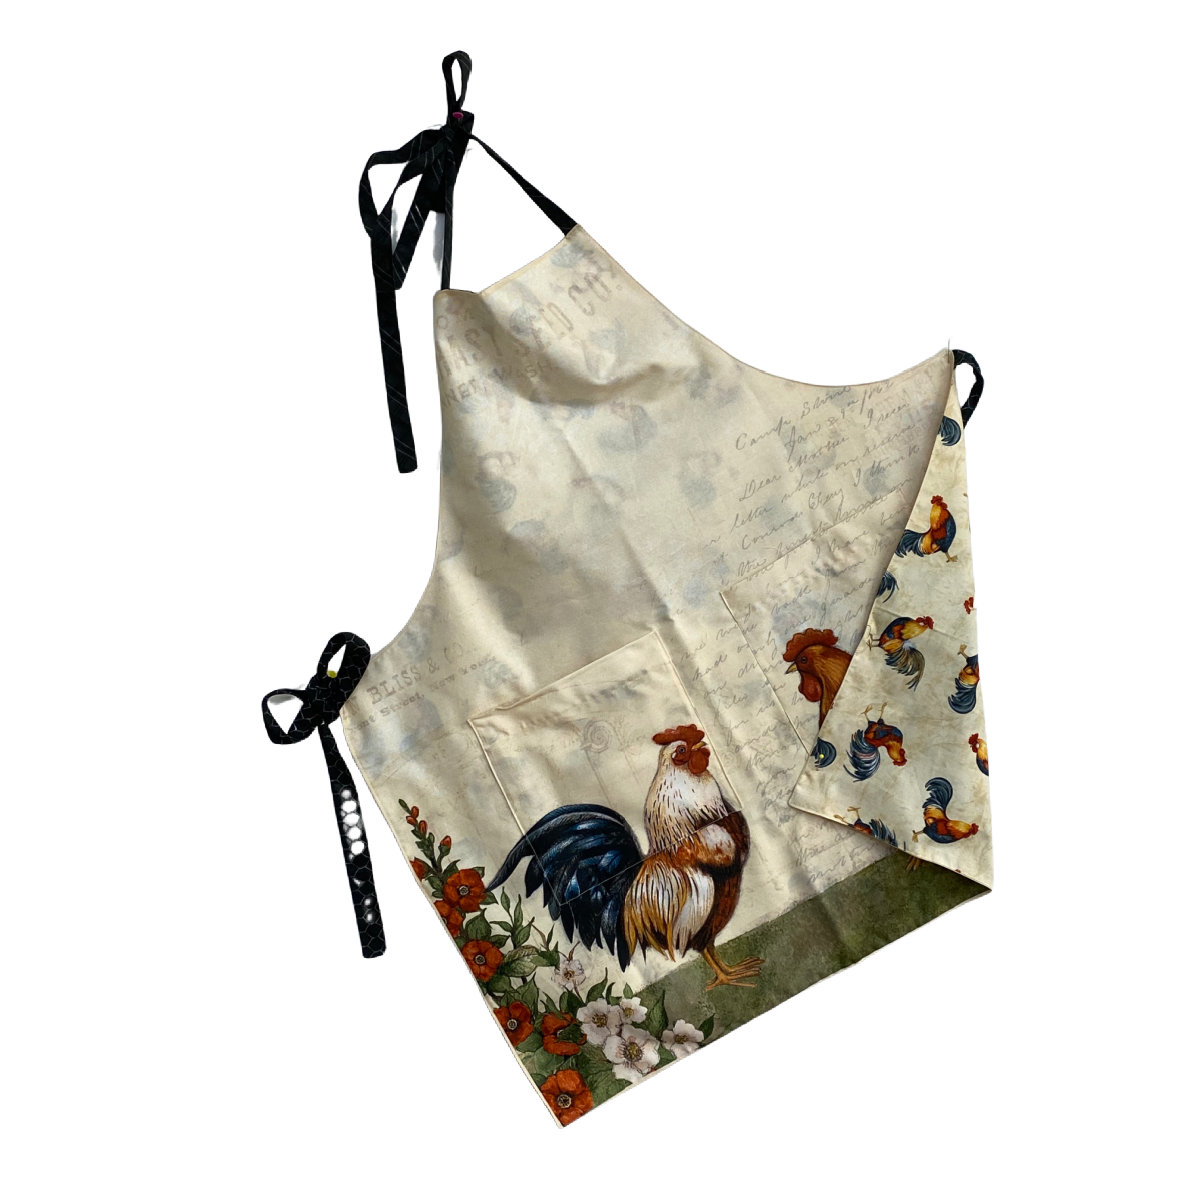 Rooster Apron Kit